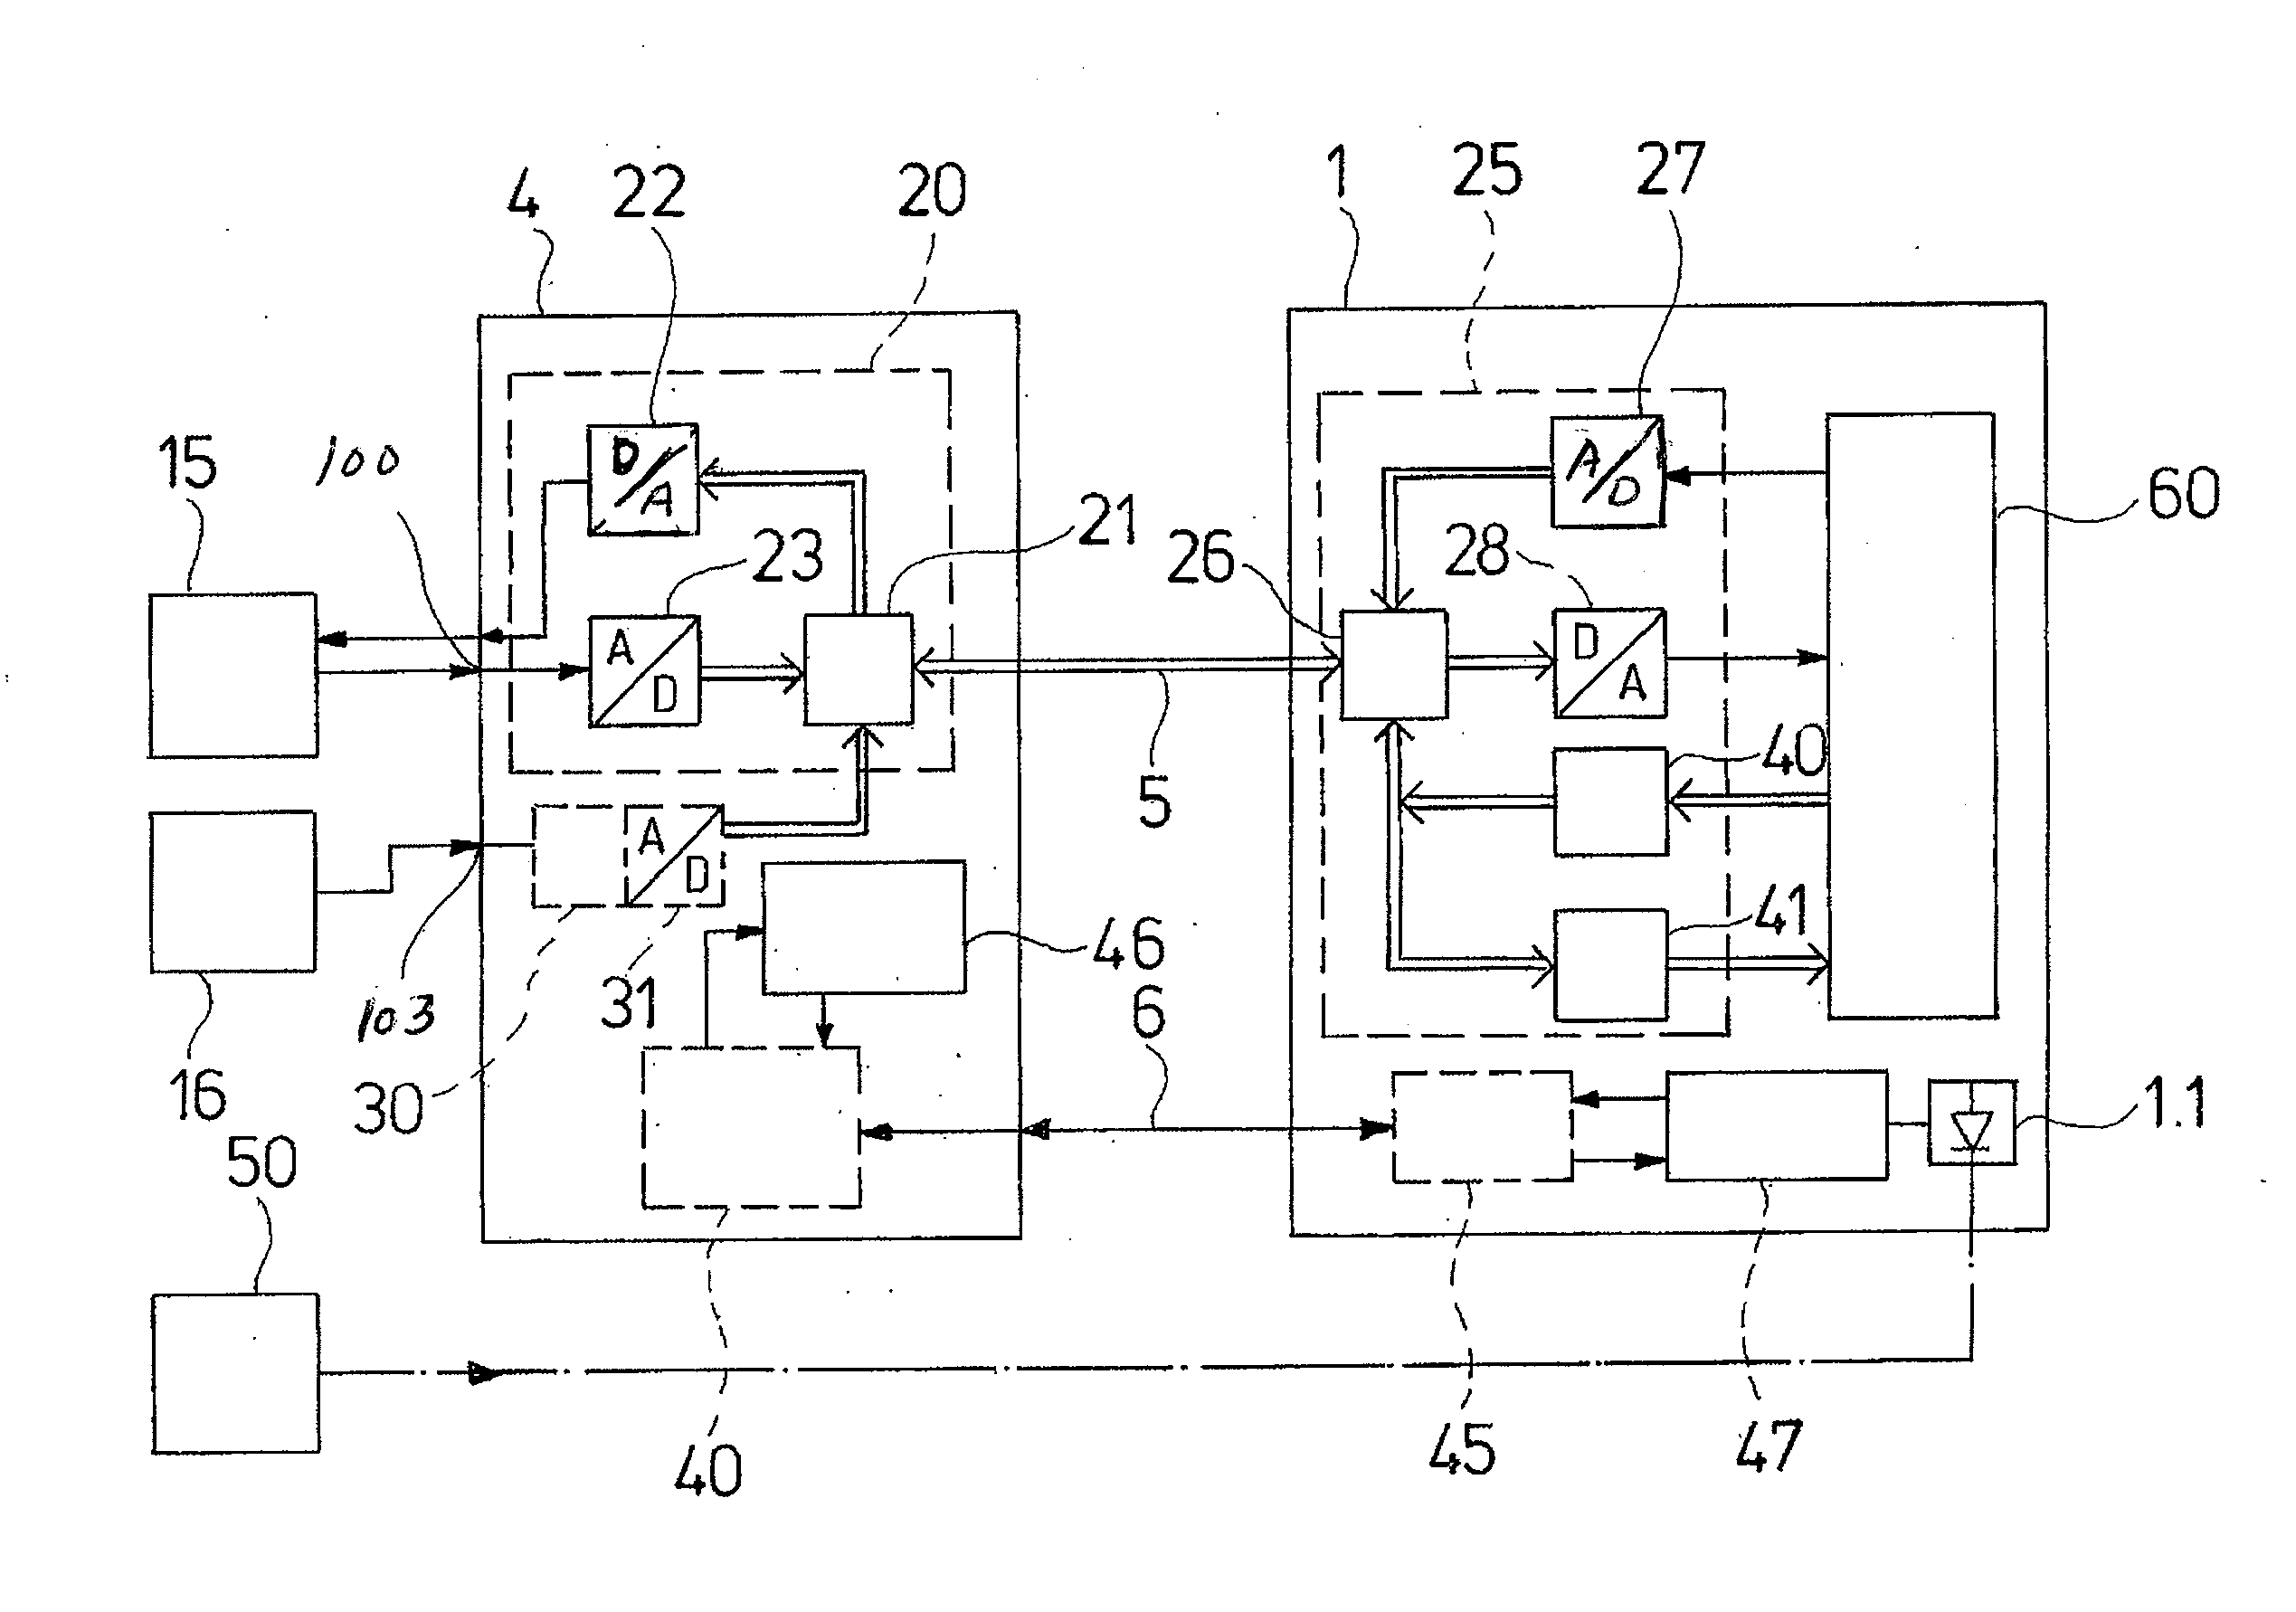 Television receiver with a flat screen display